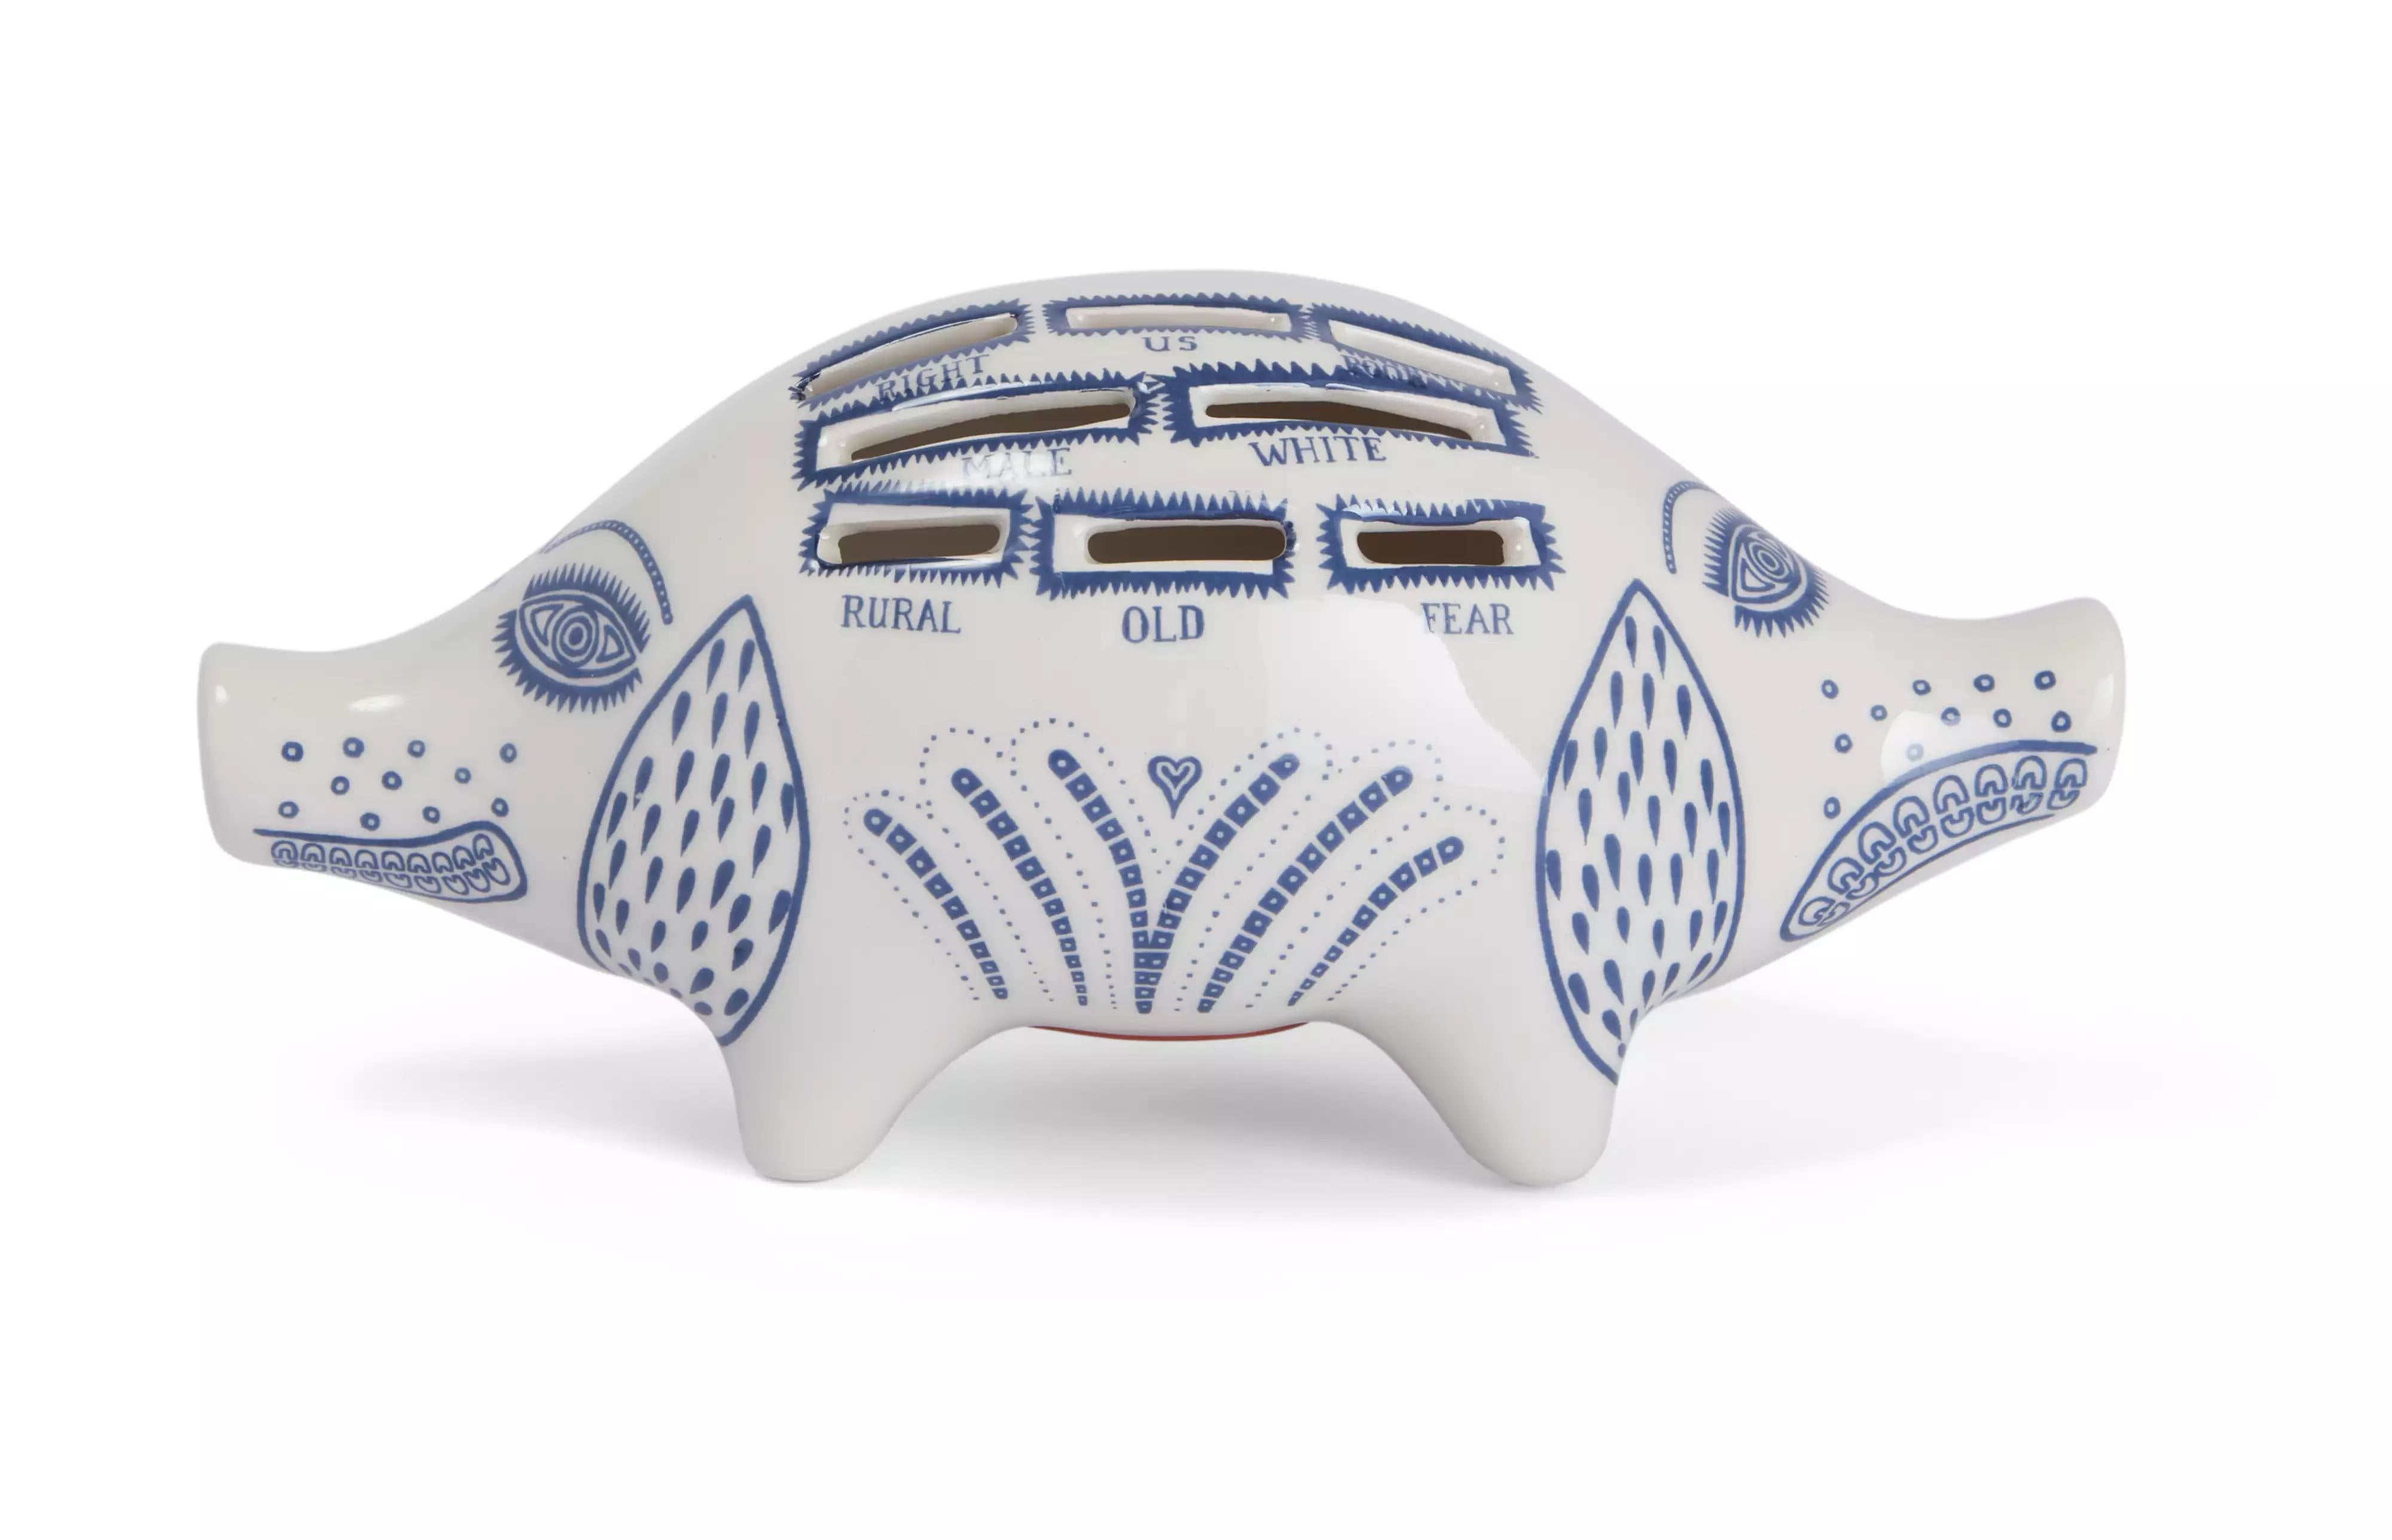 Greyson Perry, Piggy Bank, 2022

White ceramic piggy bank painted in blue and glazed, with rubber stopper Unknown edition size 
Stamped with artist's logo on the underside New. Sold with original archival box, as issued by the publisher

Produced by